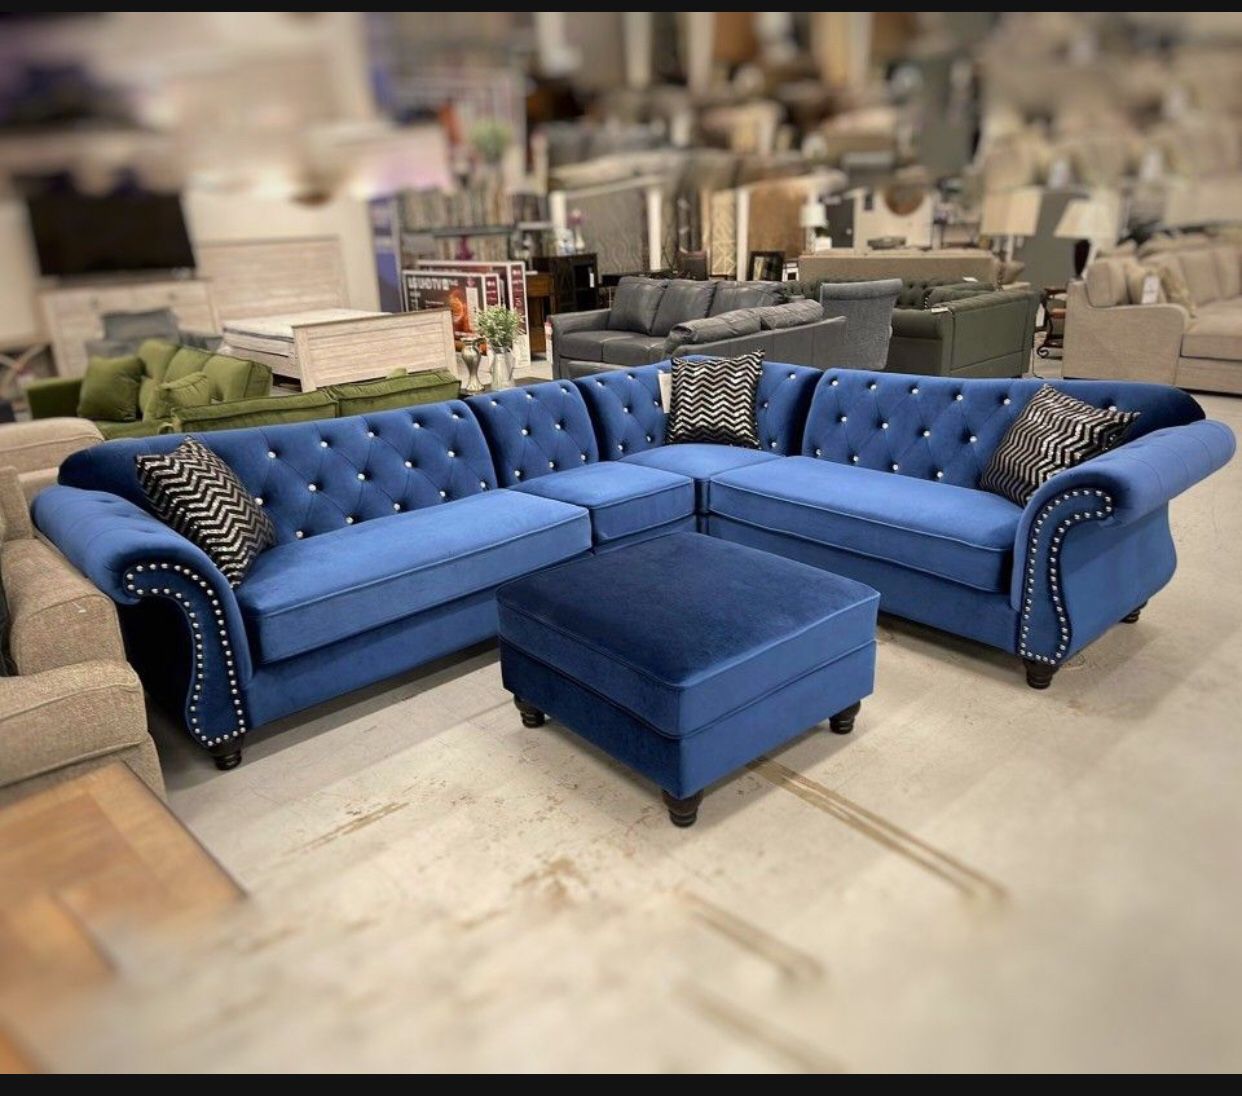 Blue Velvet Jolanda 3 Piece Sectional Couch👈 Living Room Set 👍 Showroom Available 💥 Fastest Delivery 